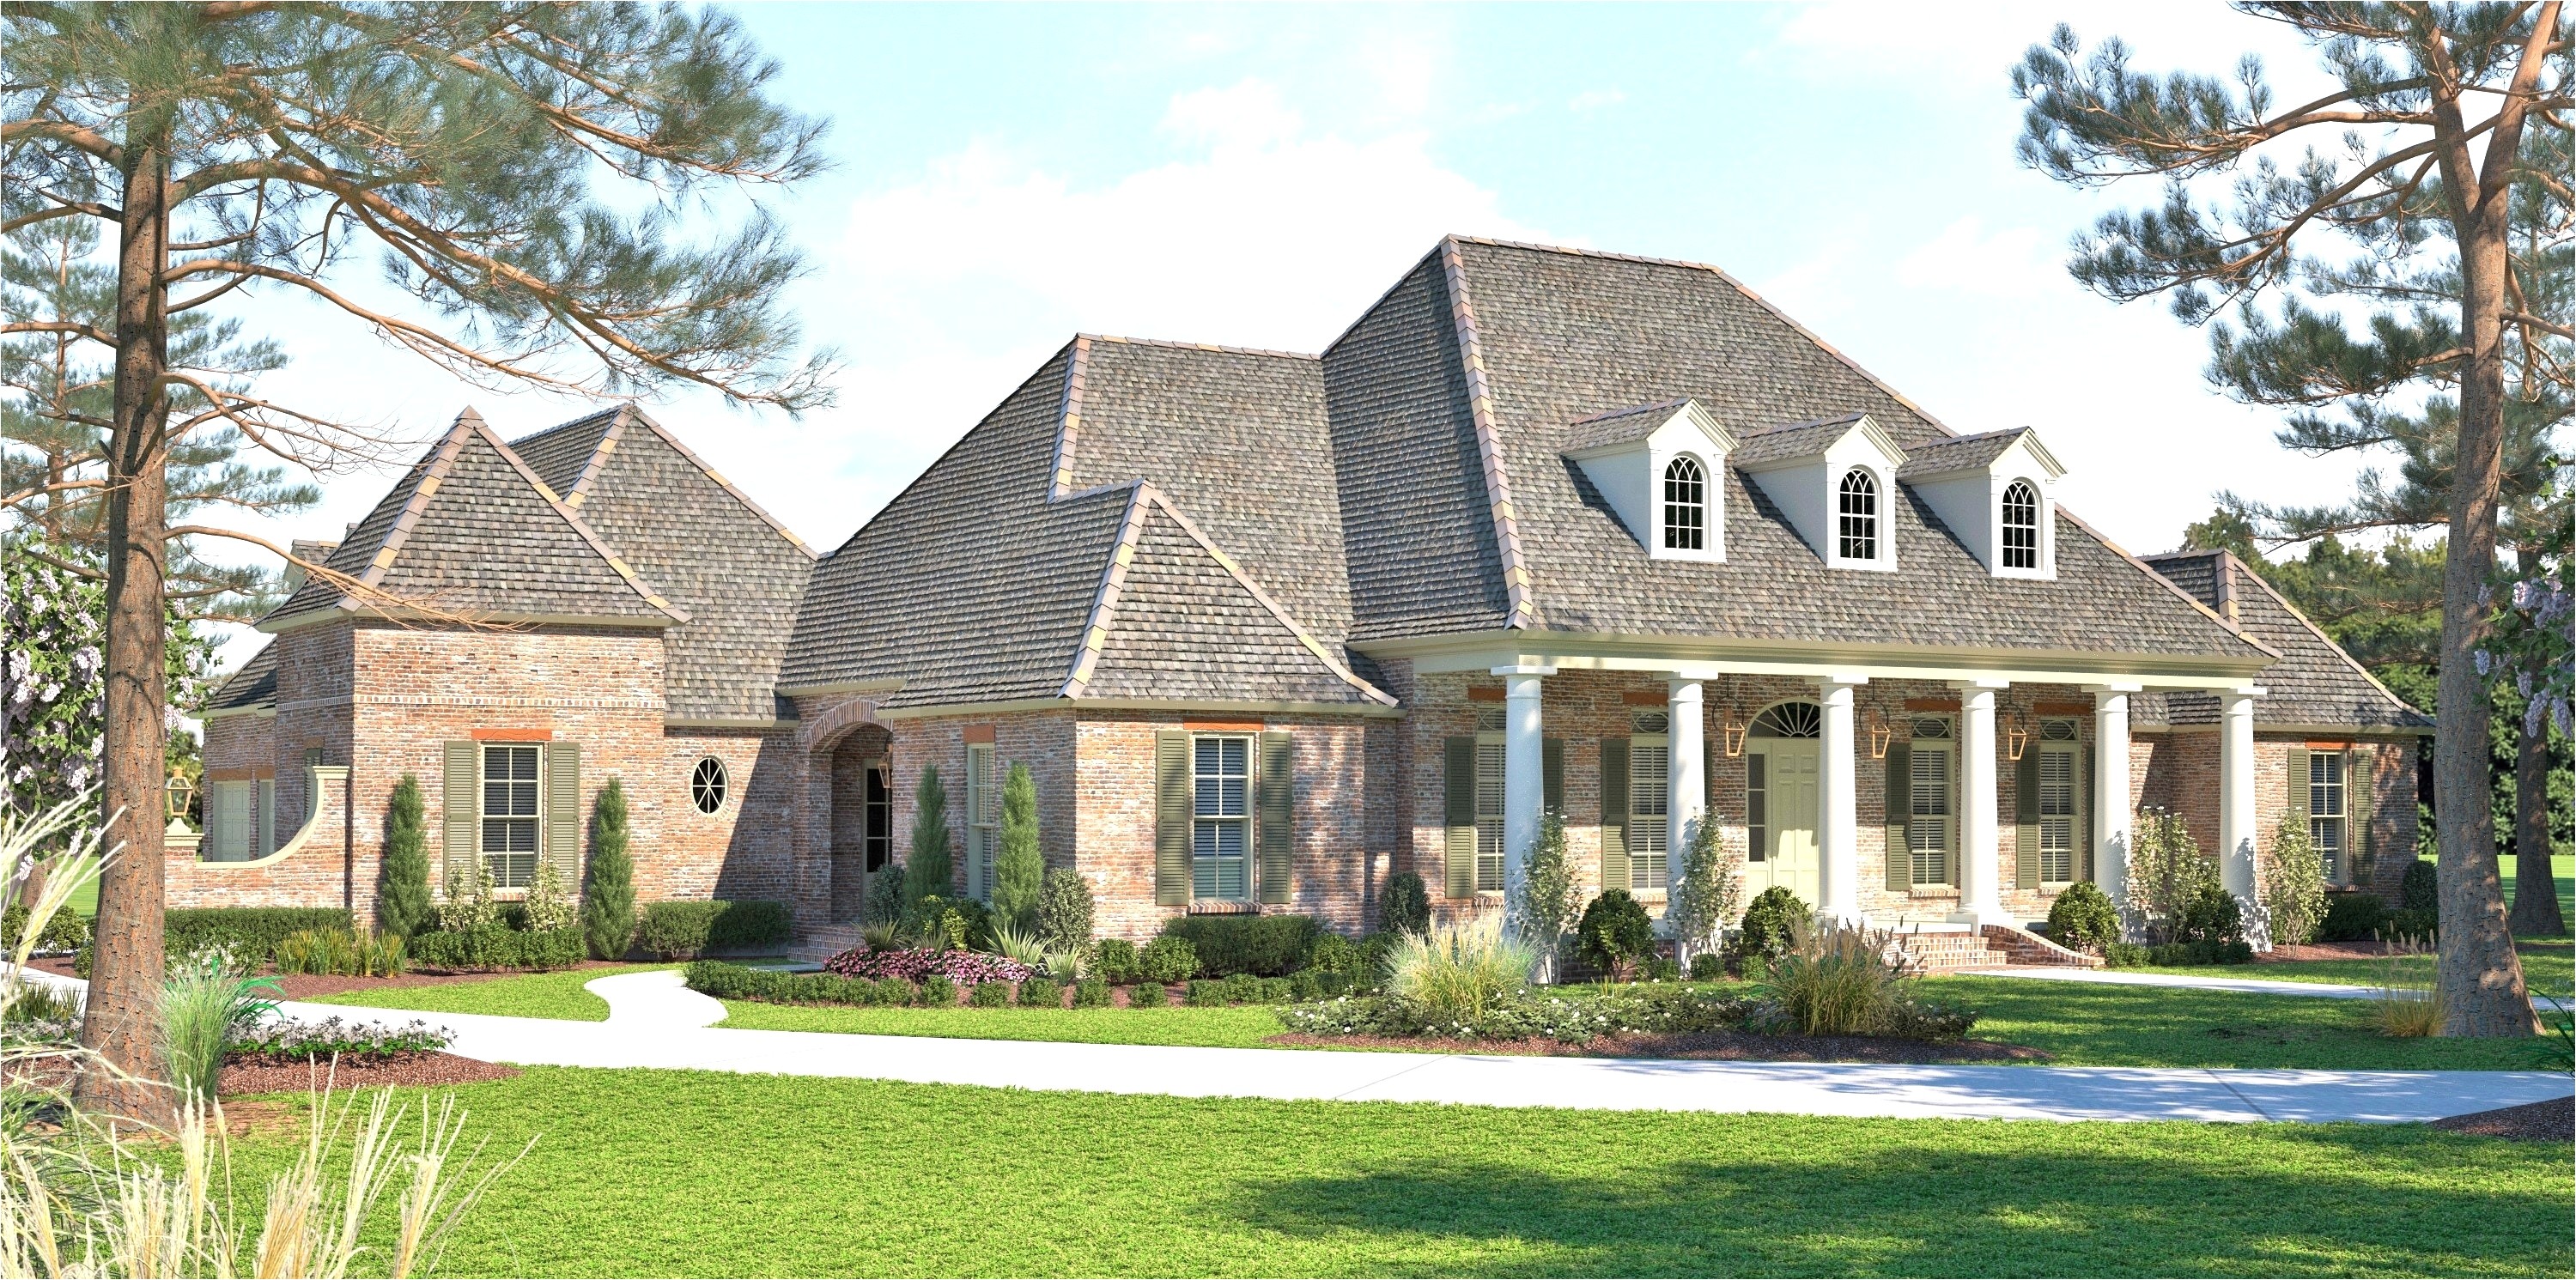 2 story french acadian house plans